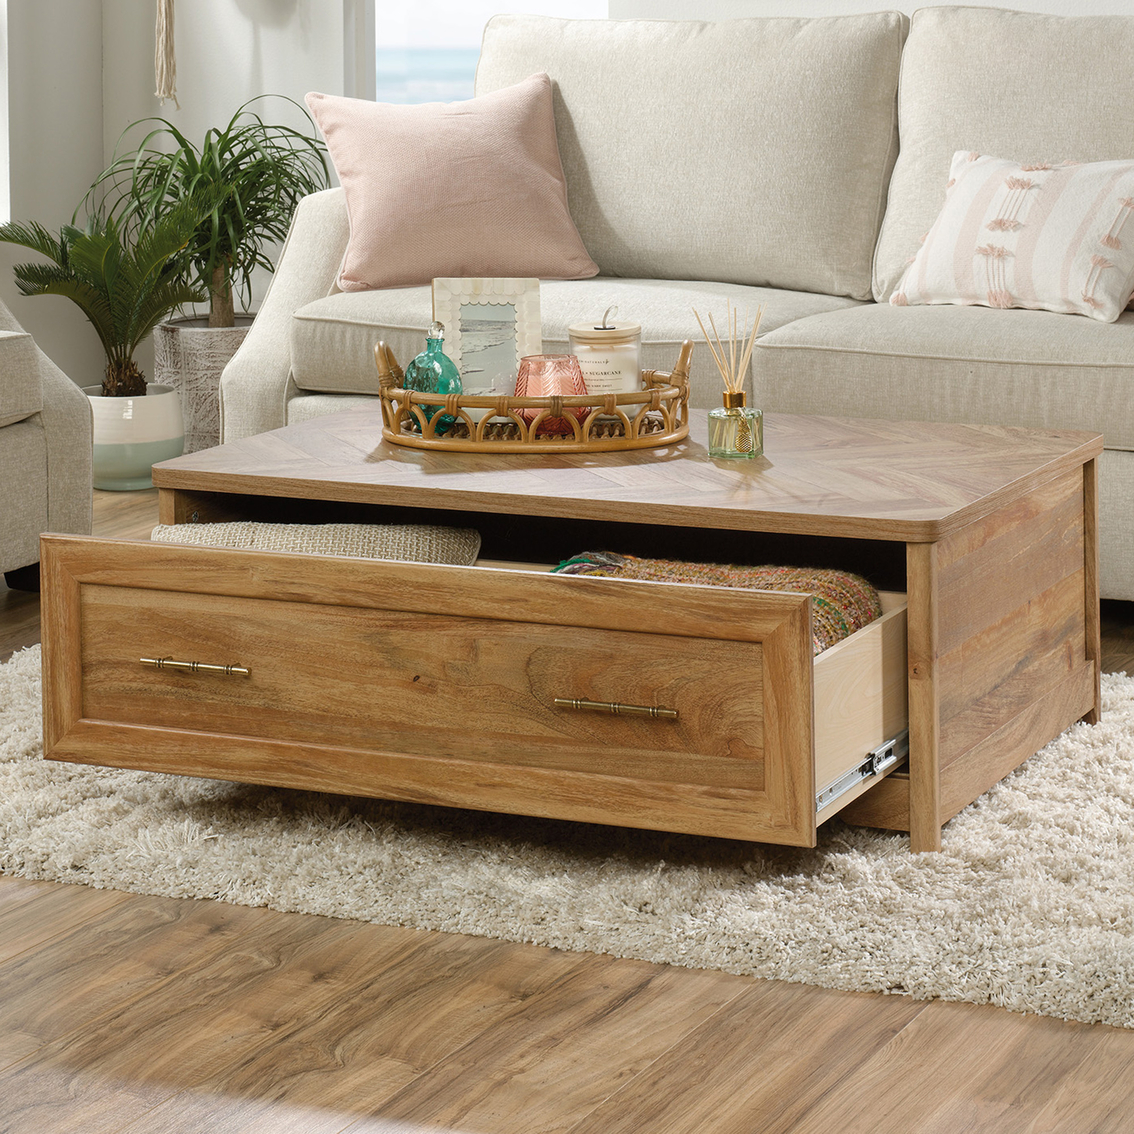 Sauder Coral Cape Coffee Table - Image 2 of 9